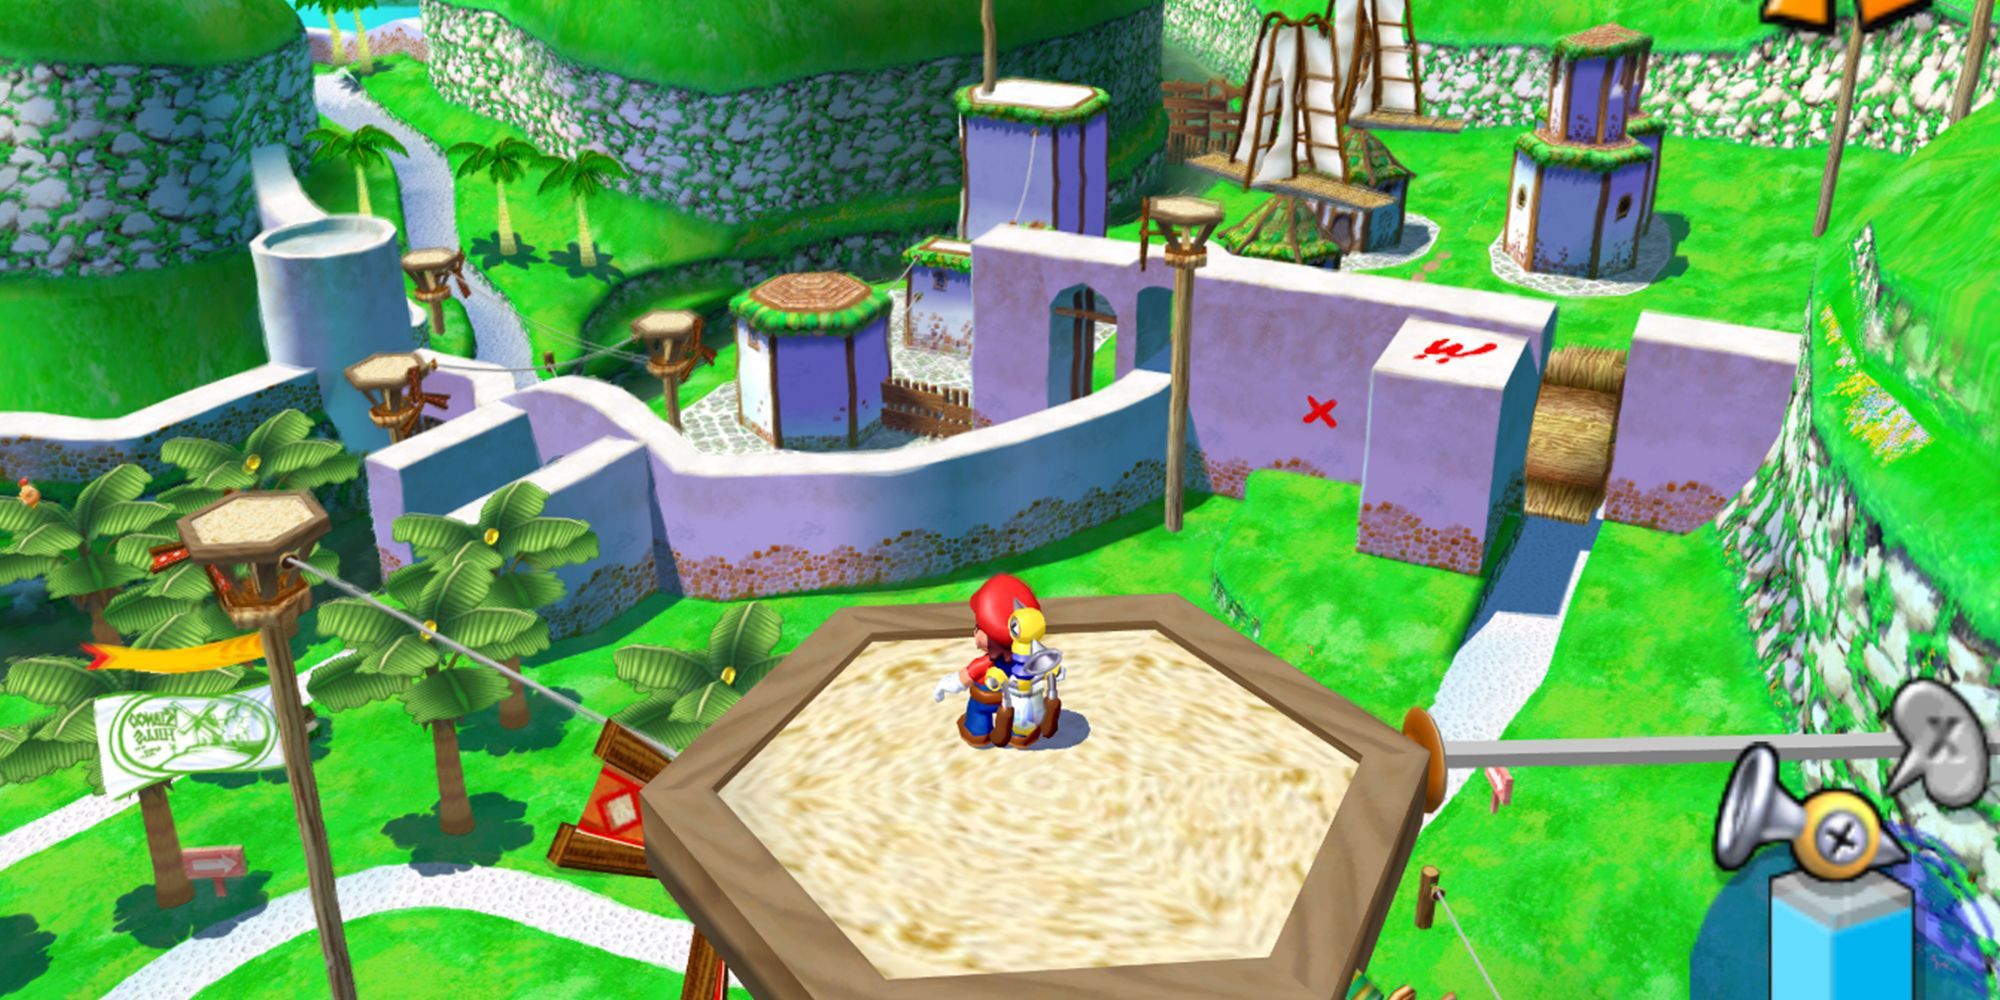 Bianco Hills from Super Mario Sunshine, with Mario looking out across a series of walls from a wooden platform